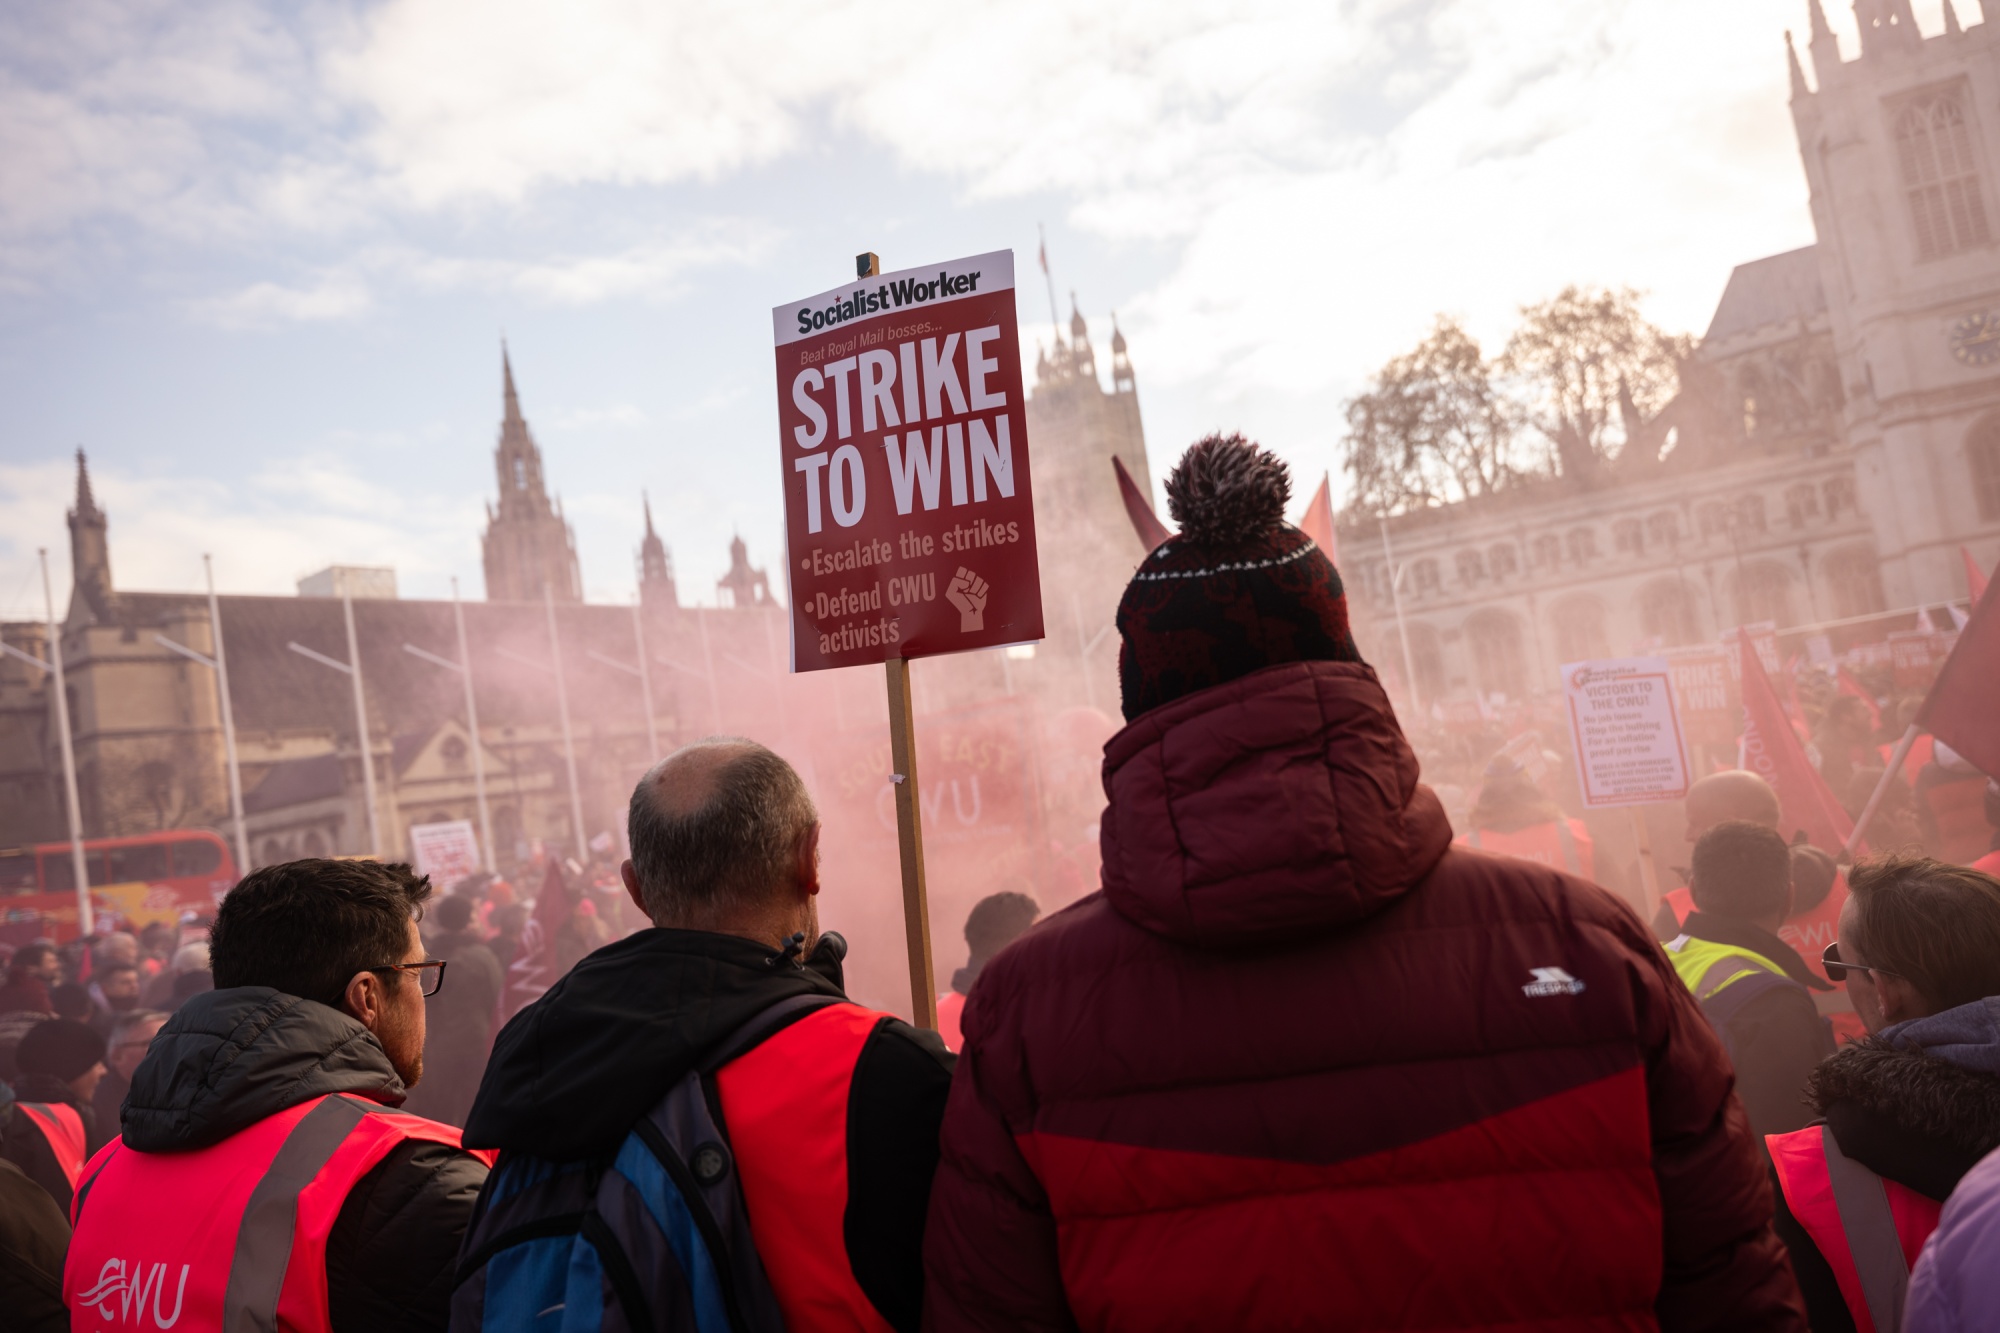 Striking Royal Mail workers attend the 'National Postal Workers Strike Rally' outside the Houses of Parliament in London, on Dec. 9.